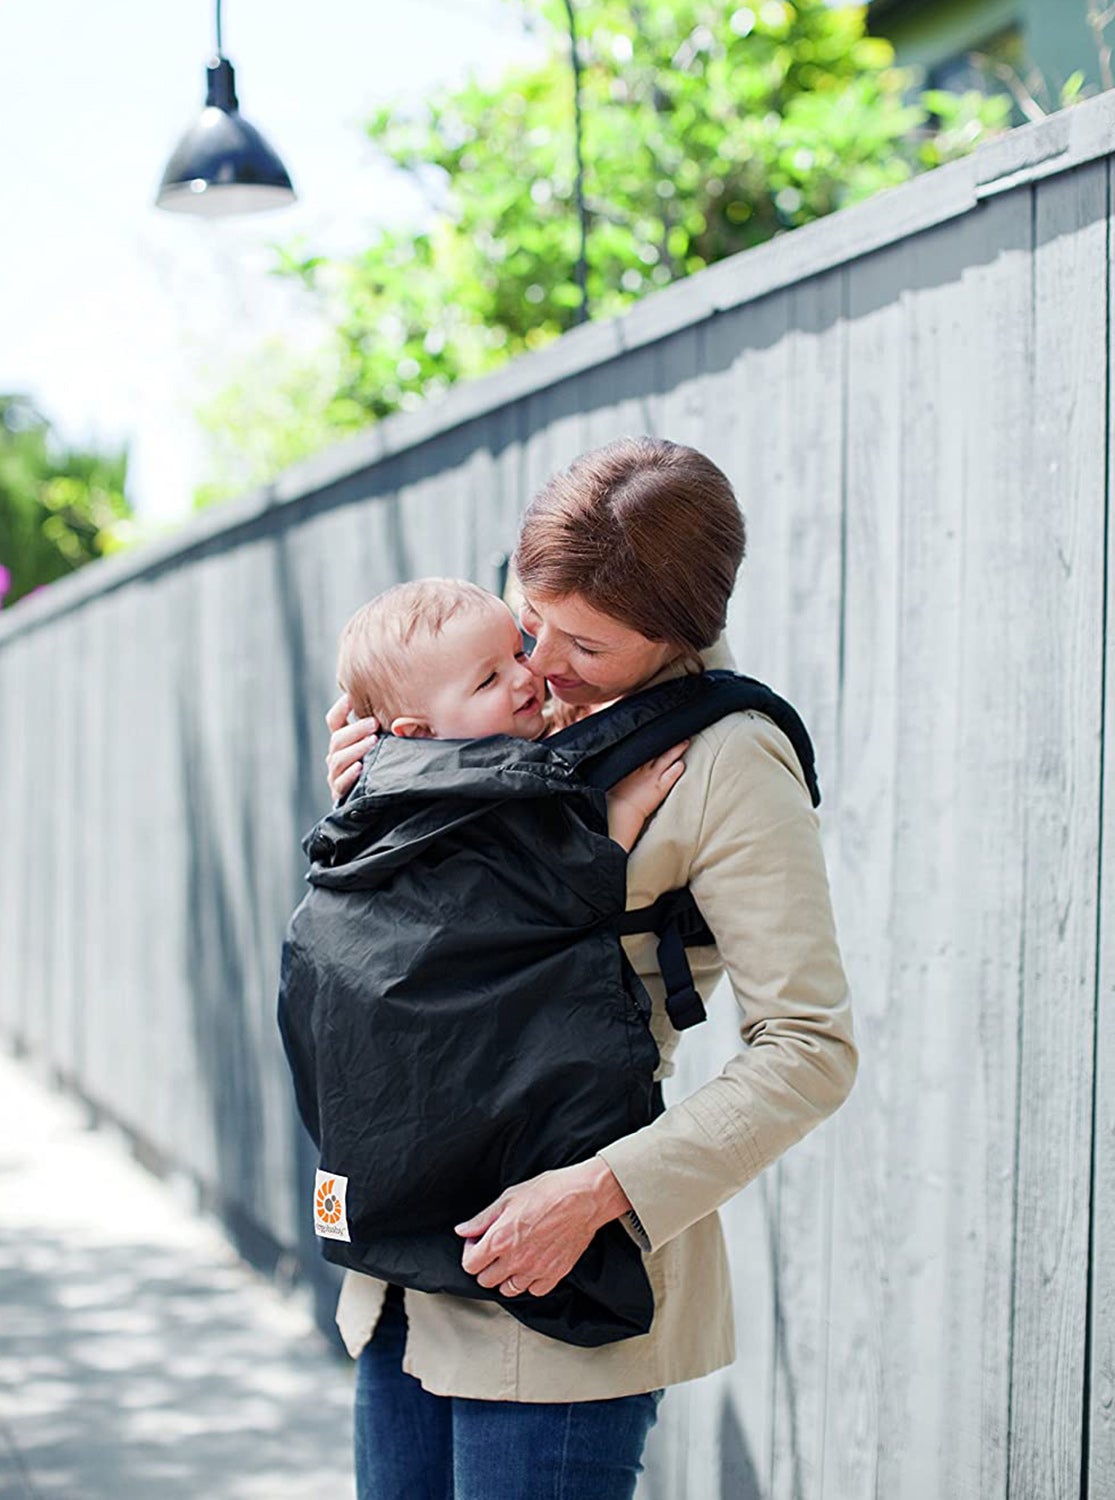 ERGOBABY All Weather Rain Cover - Attaches to any Ergo Carrier, -- ANB Baby